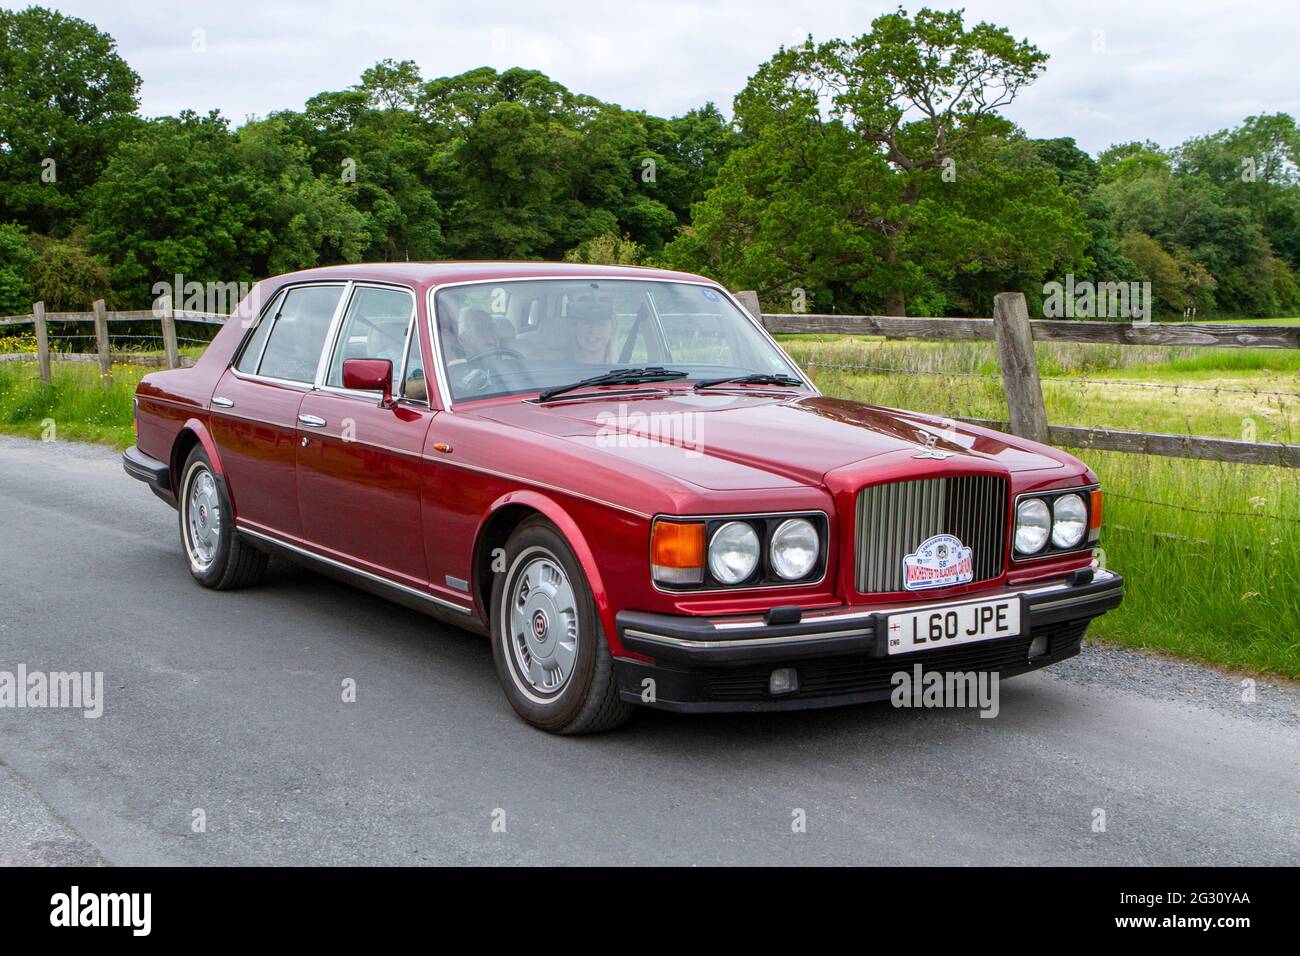 1994 90s red Bentley Brooklands Auto 6750cc at the 58th Annual Manchester to Blackpool Vintage & Classic Car Run The event is a ‘Touring Assembly’ Stock Photo